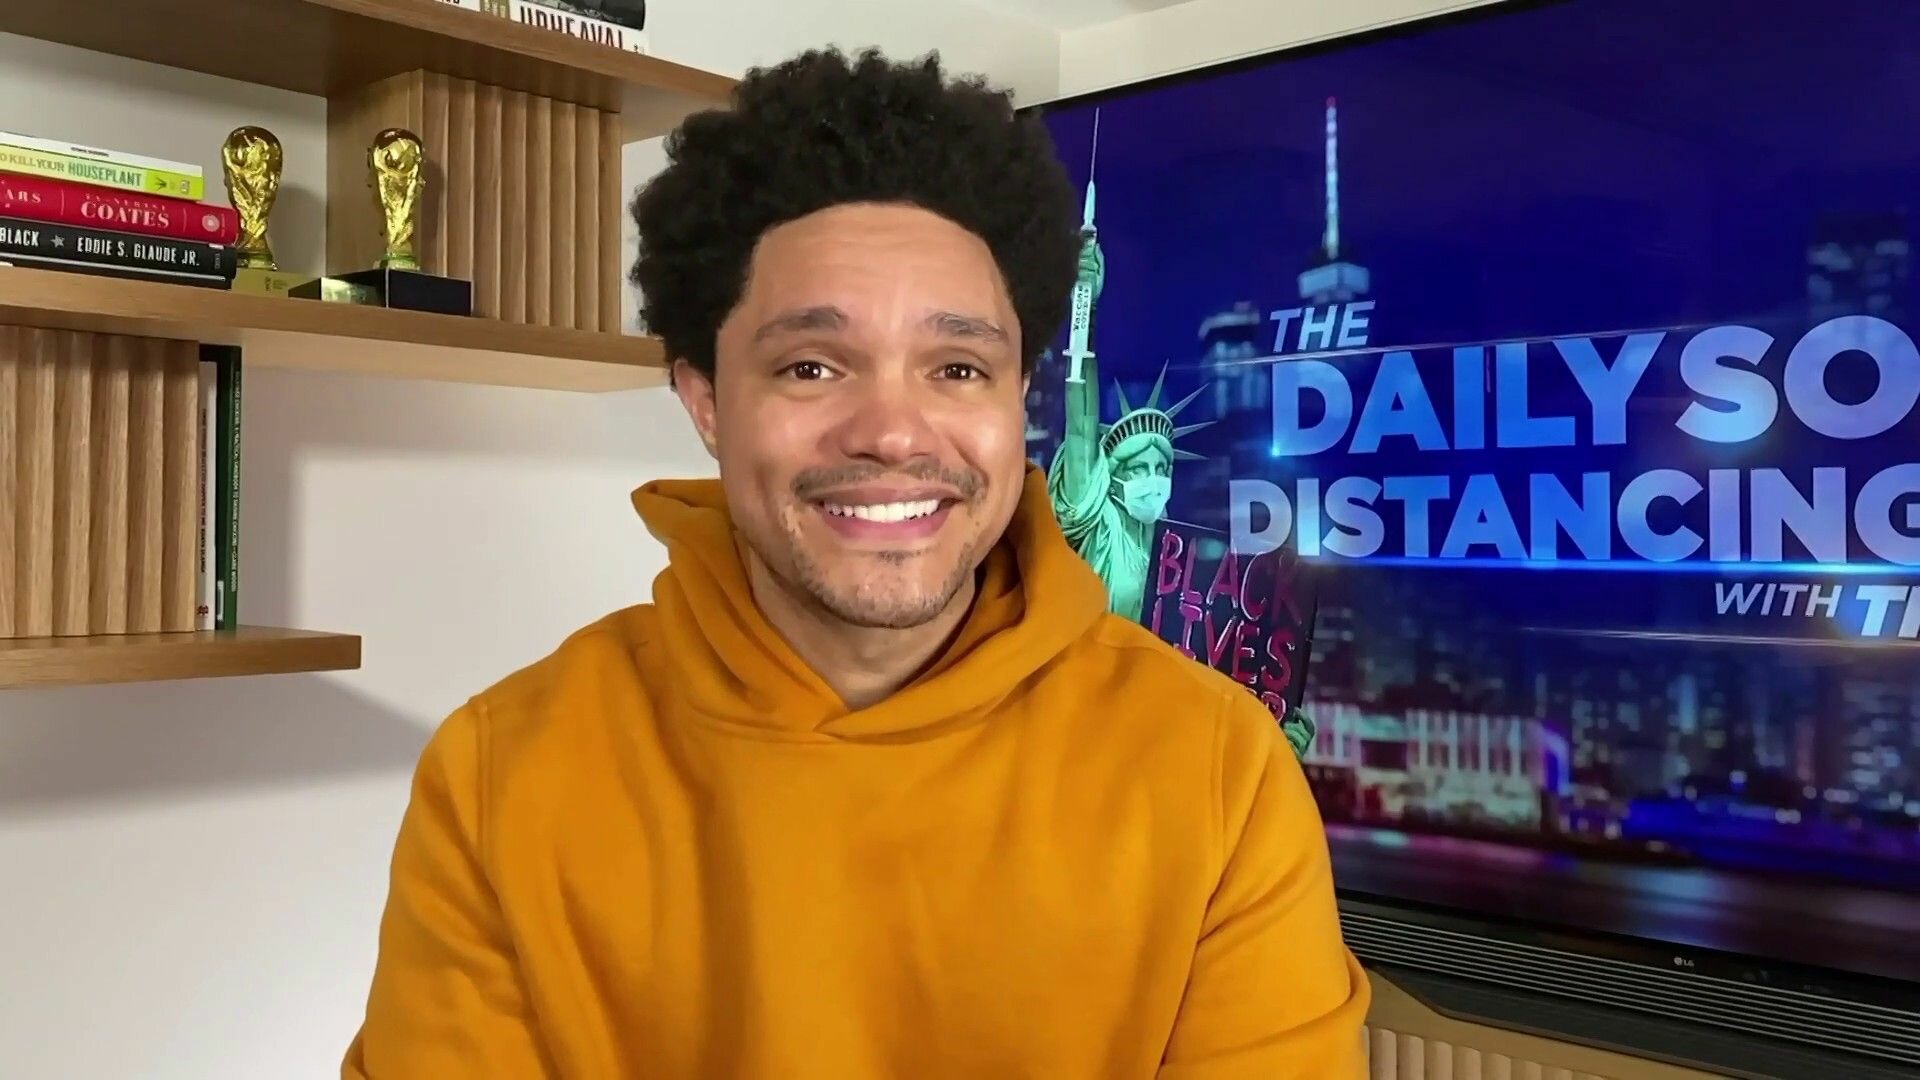 The Daily Show with Trevor Noah Show Summary, Episodes and TV